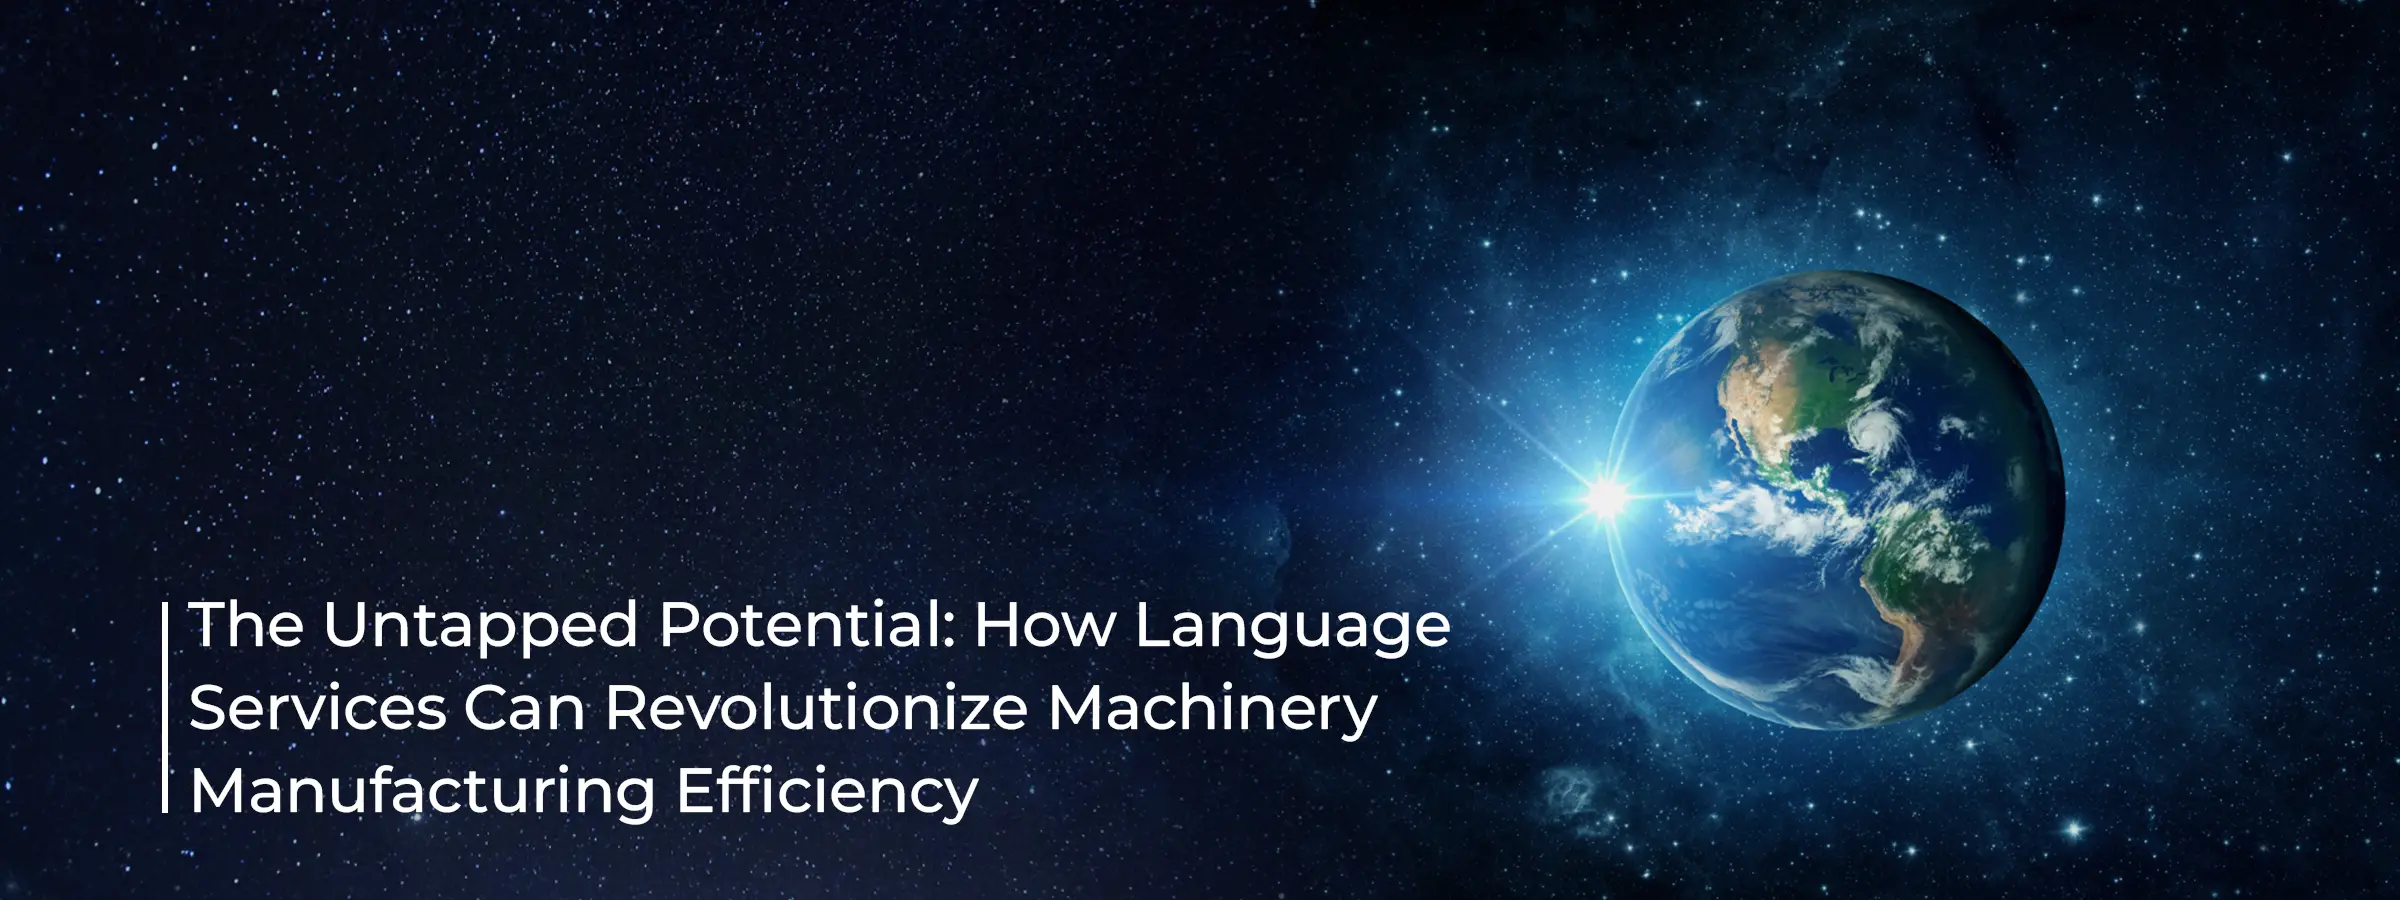 the-untapped-potential-how-language-services-can-revolutionize-machinery-manufacturing-efficiency-banner